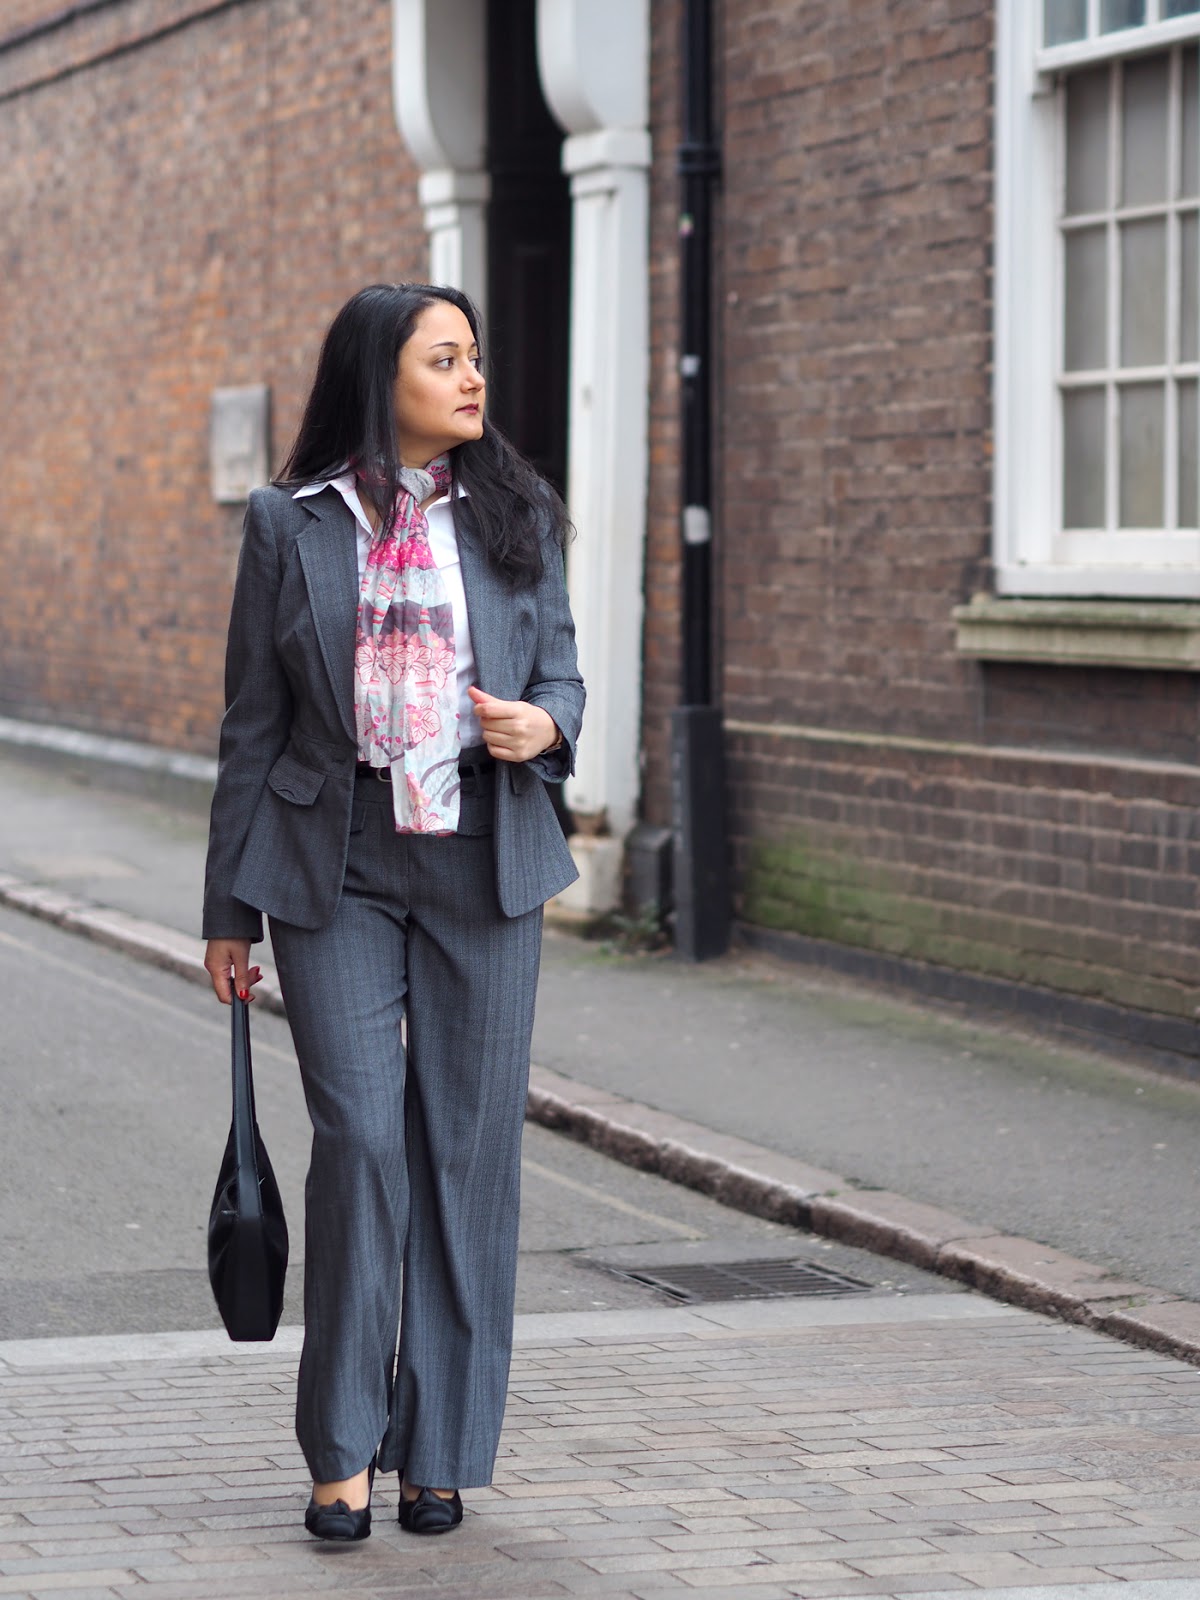 How to nail the trouser suit look